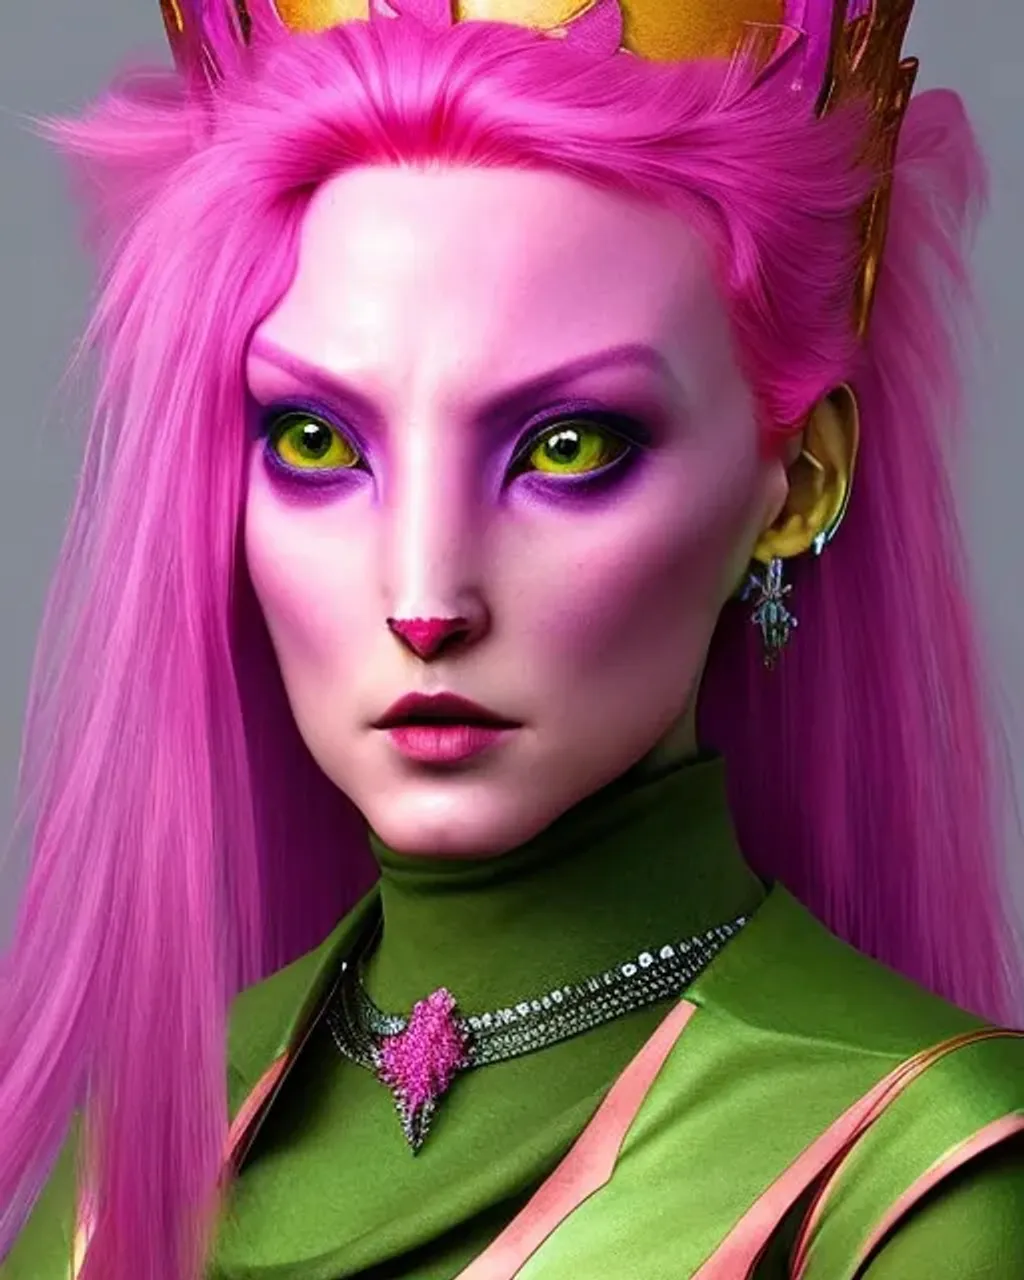 Prompt: a woman with pink hair and a crown on her head, an airbrush painting, zbrush central contest winner, fantasy art, beeple and jean giraud, avatar image, peter kemp, humanoid feathered head, highly detailed vfx portrait of